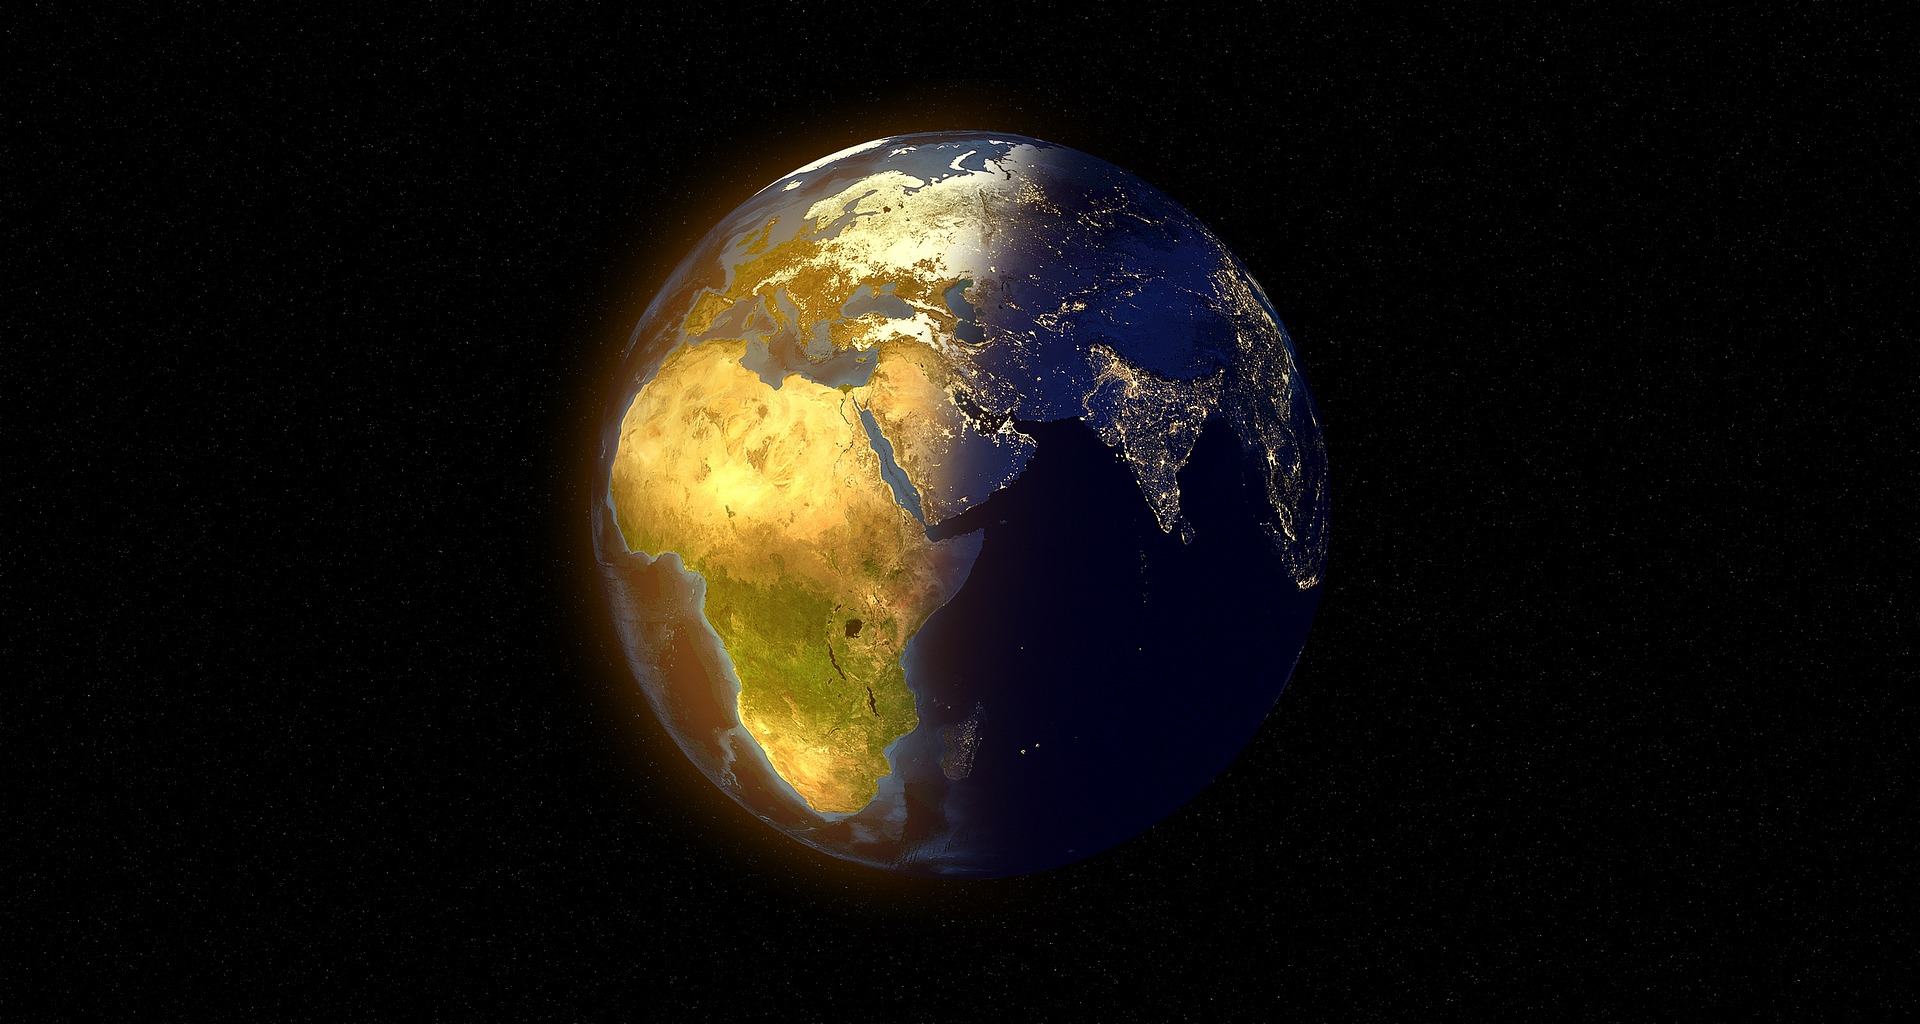 The Earth in orbit, with one side illuminated by the sun, and the other side in darkness.